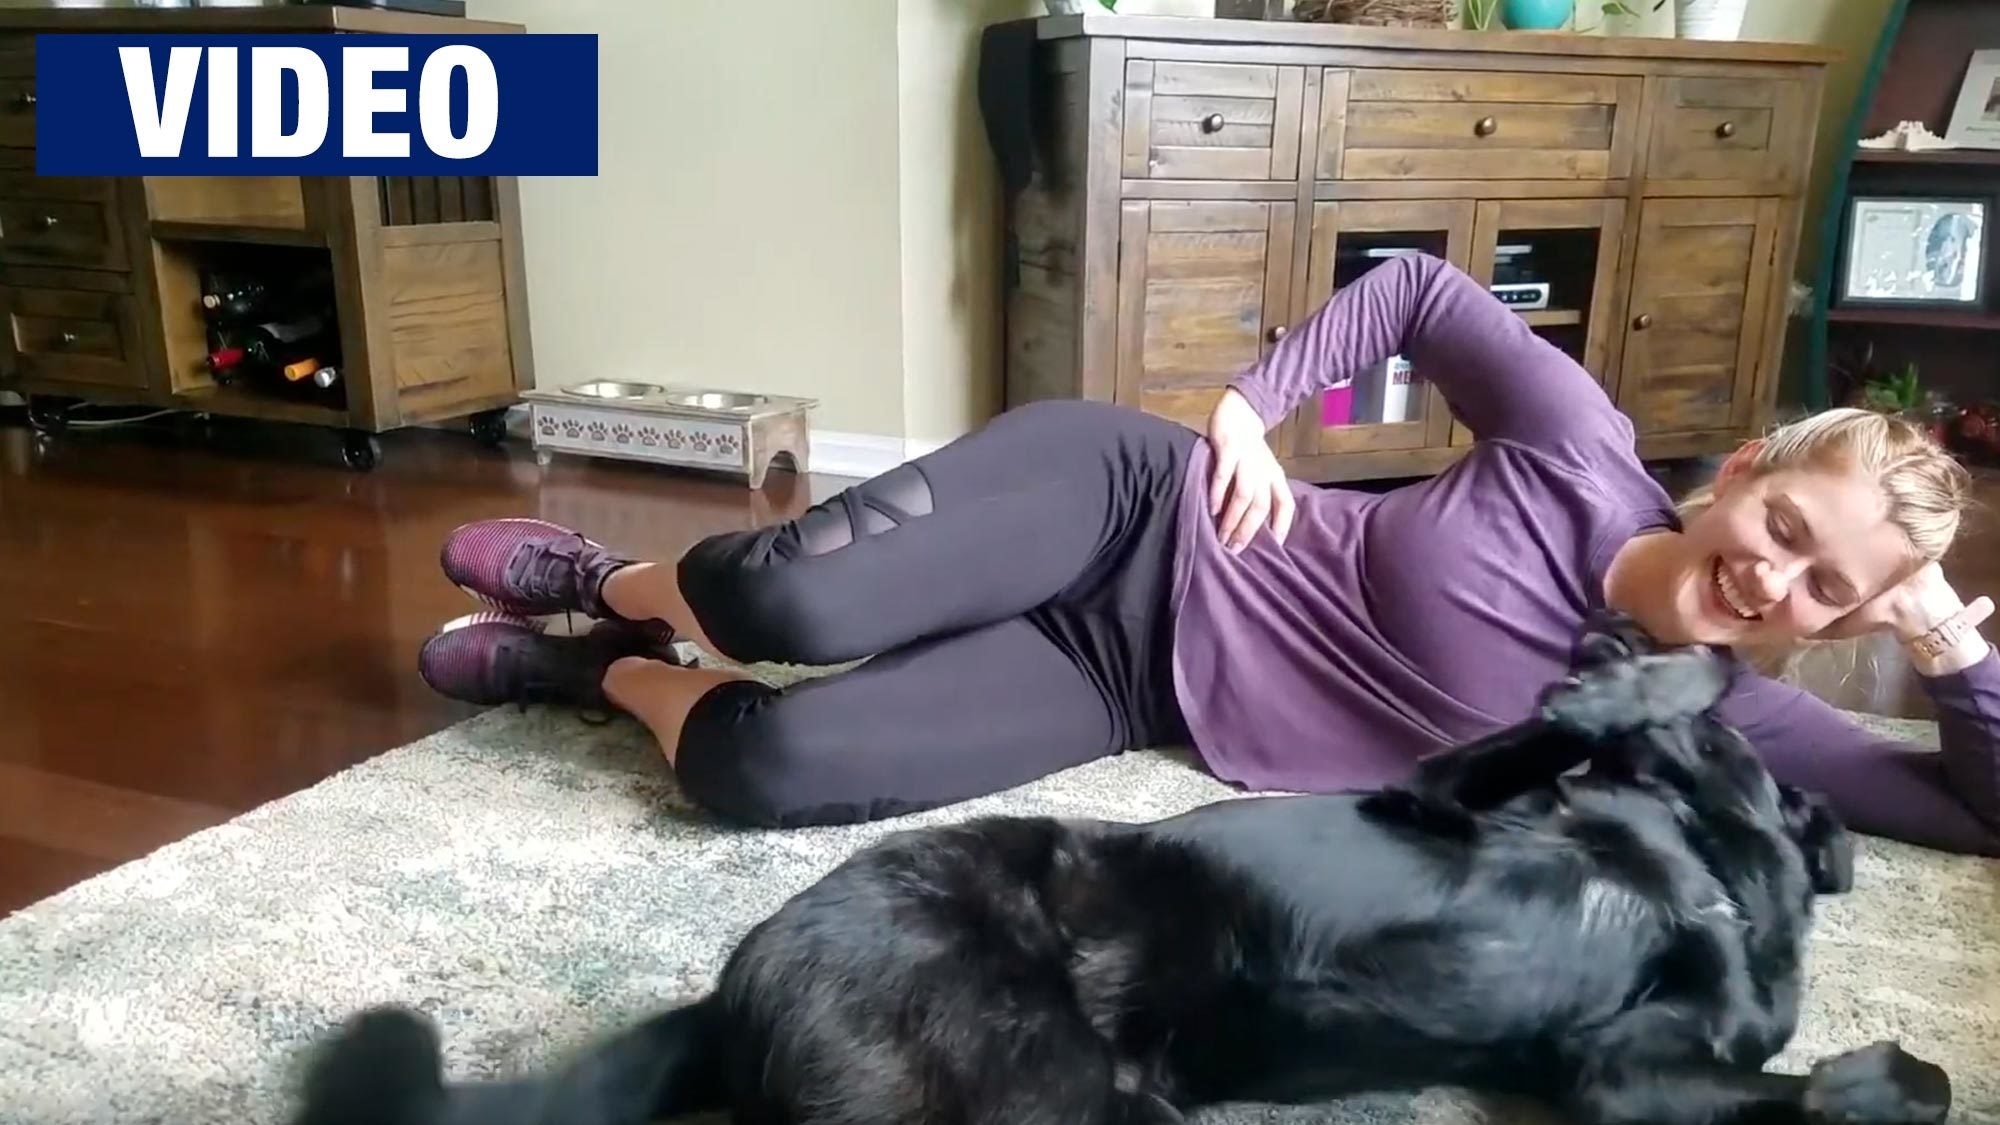 A Yates trainer works out at home with her dog